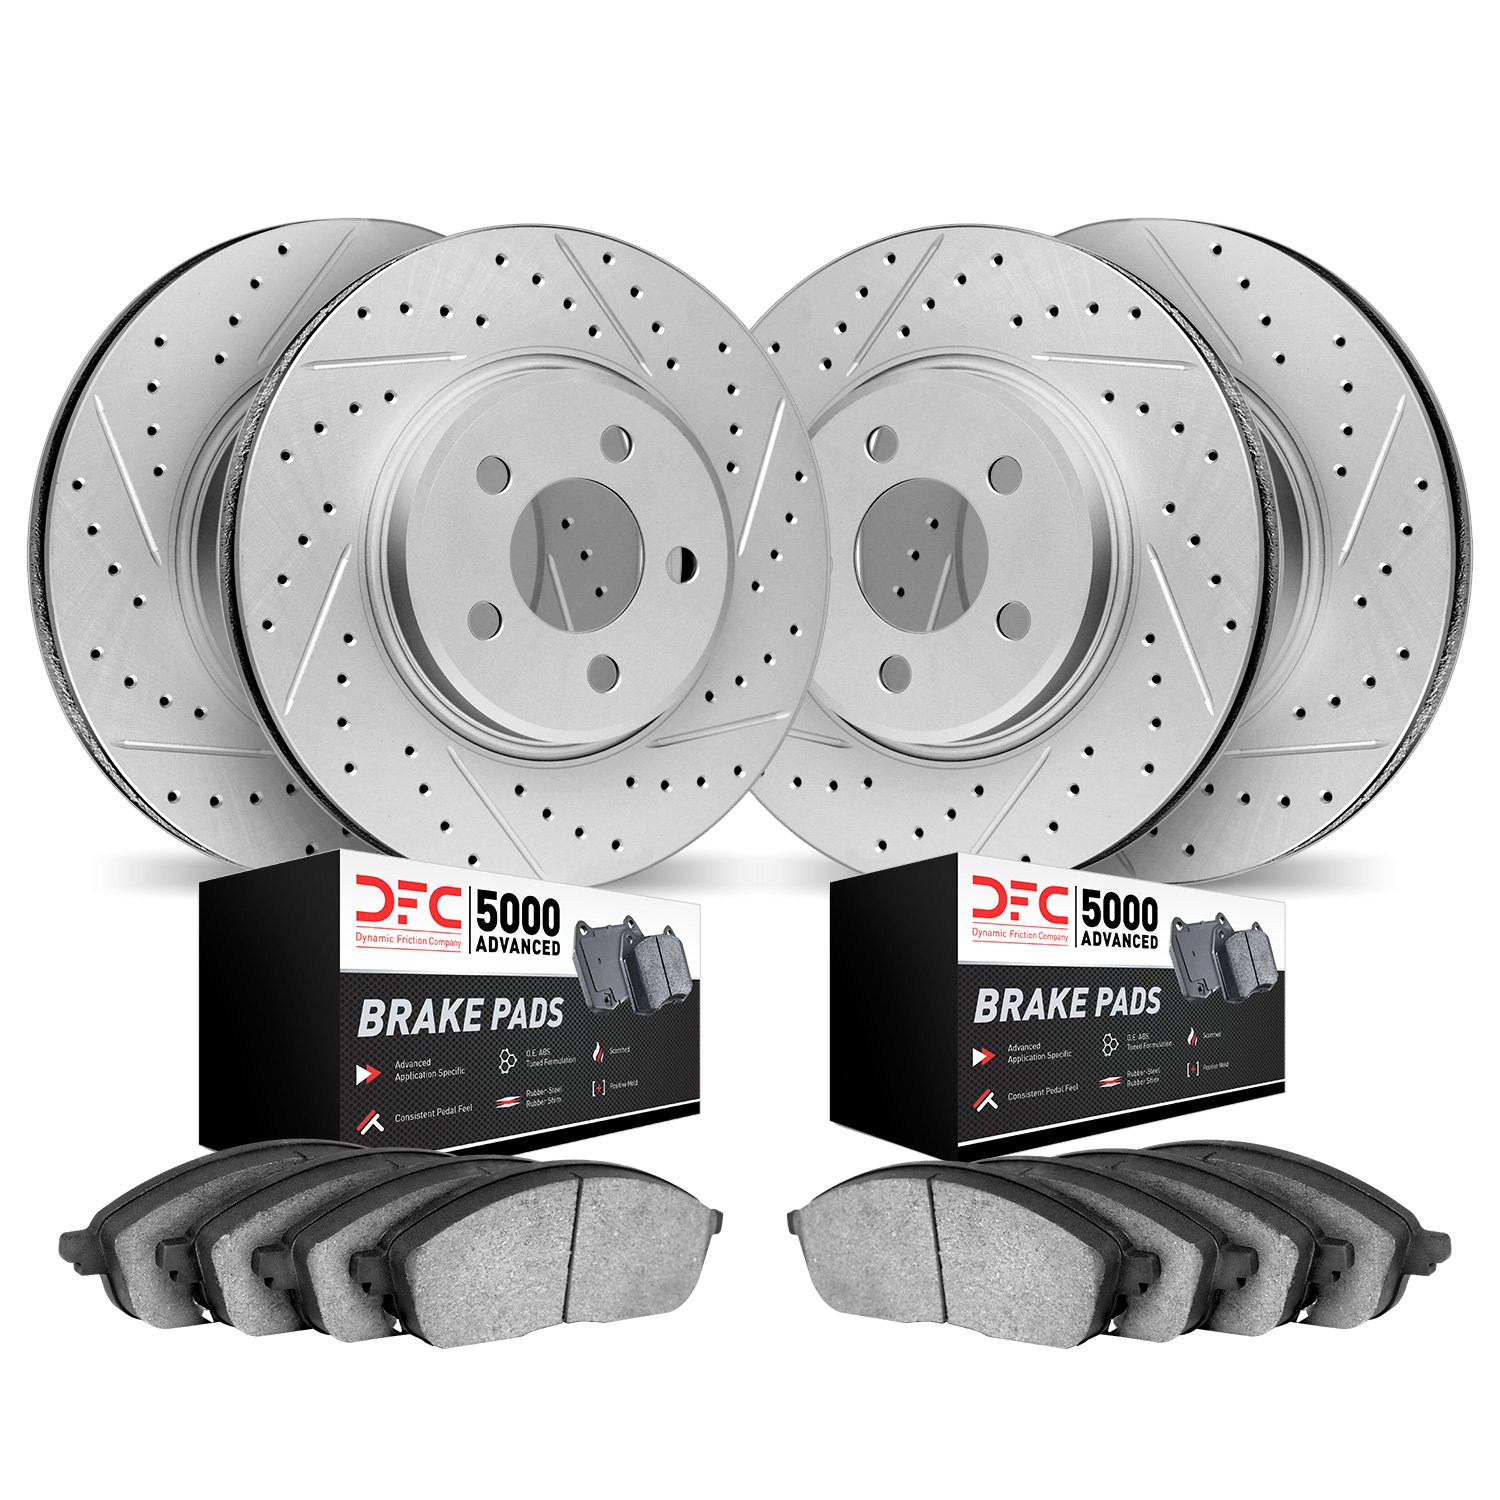 2504-11005 Geoperformance Drilled/Slotted Rotors w/5000 Advanced Brake Pads Kit, 2010-2012 Land Rover, Position: Front and Rear